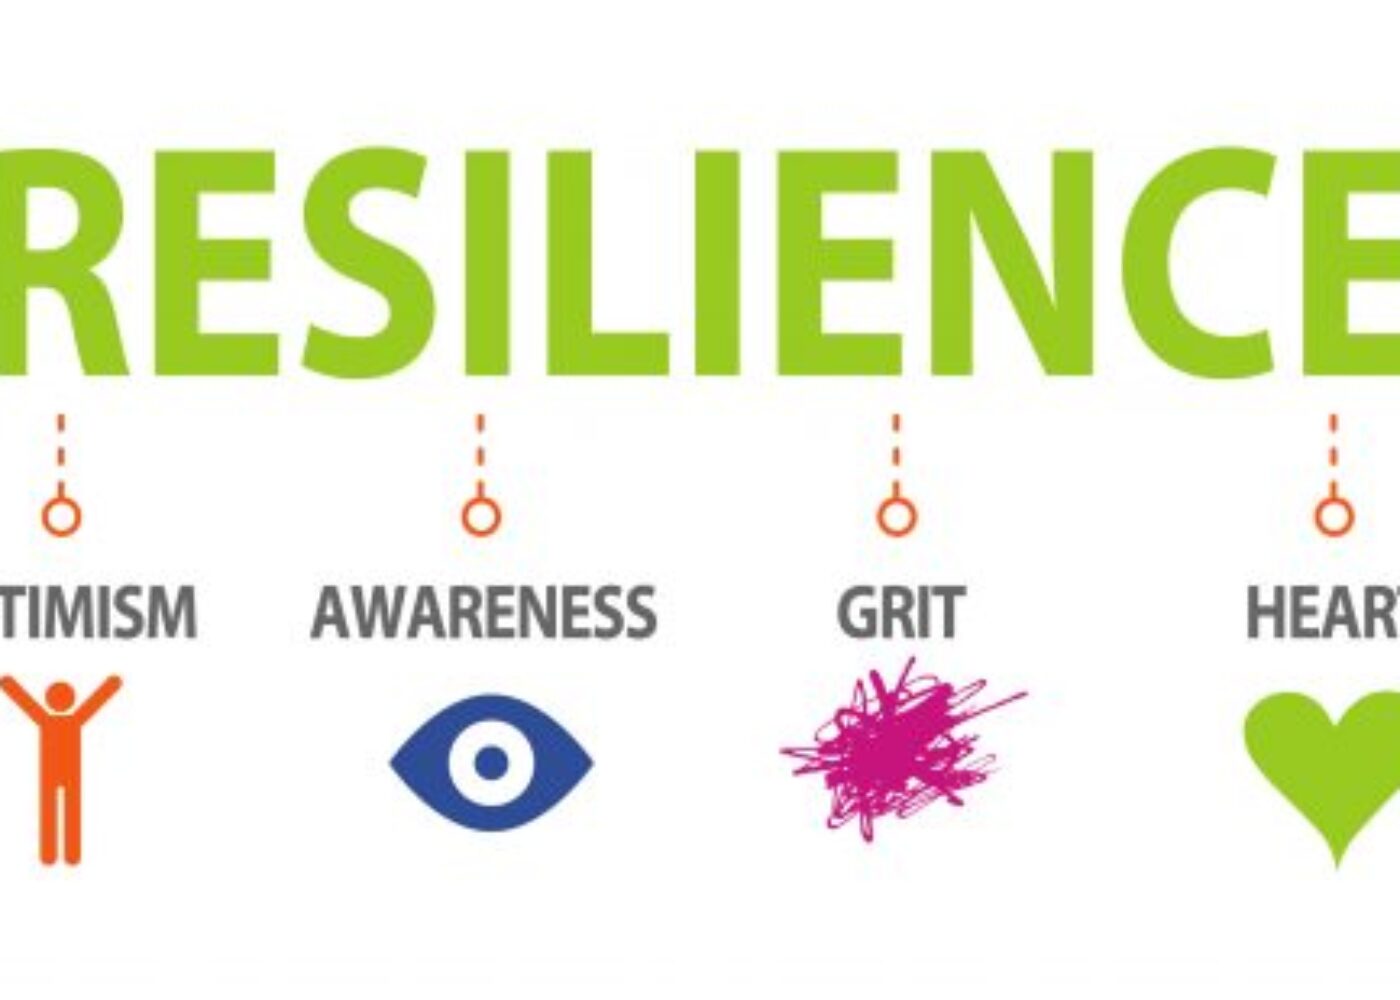 ResilienceIconsgreen-768x309